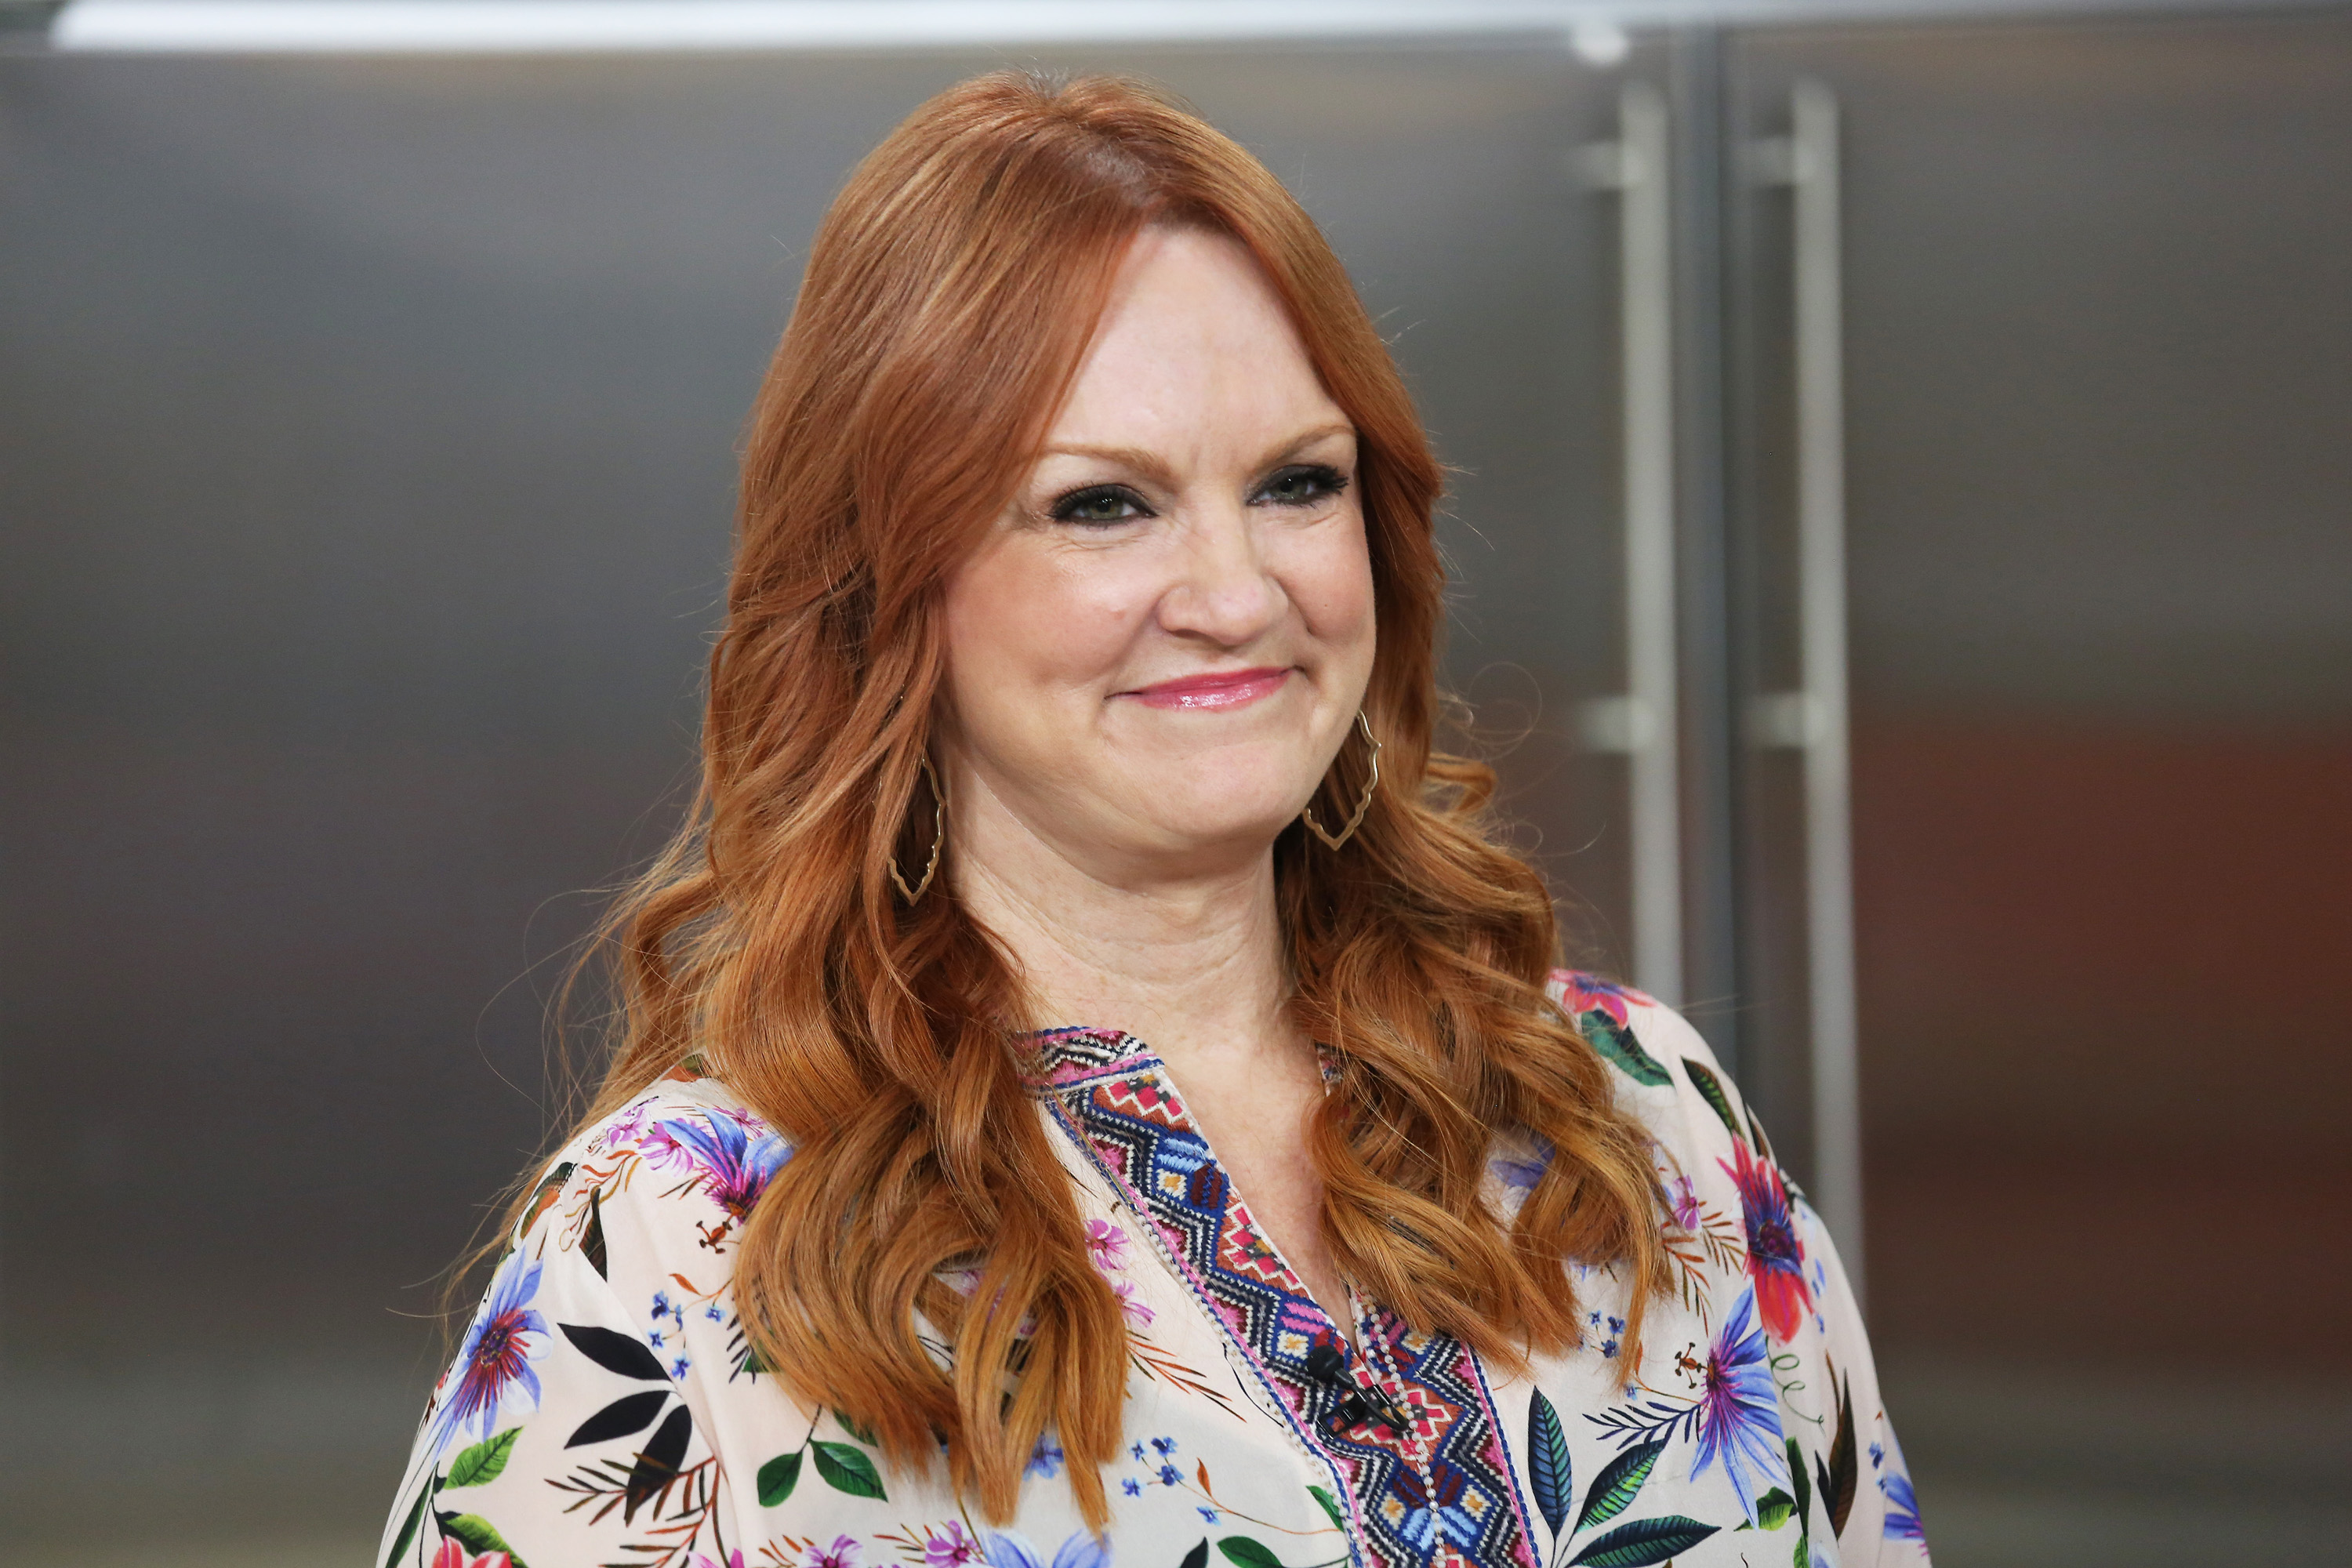 Ree Drummond smiles and wears a flower pattern blouse